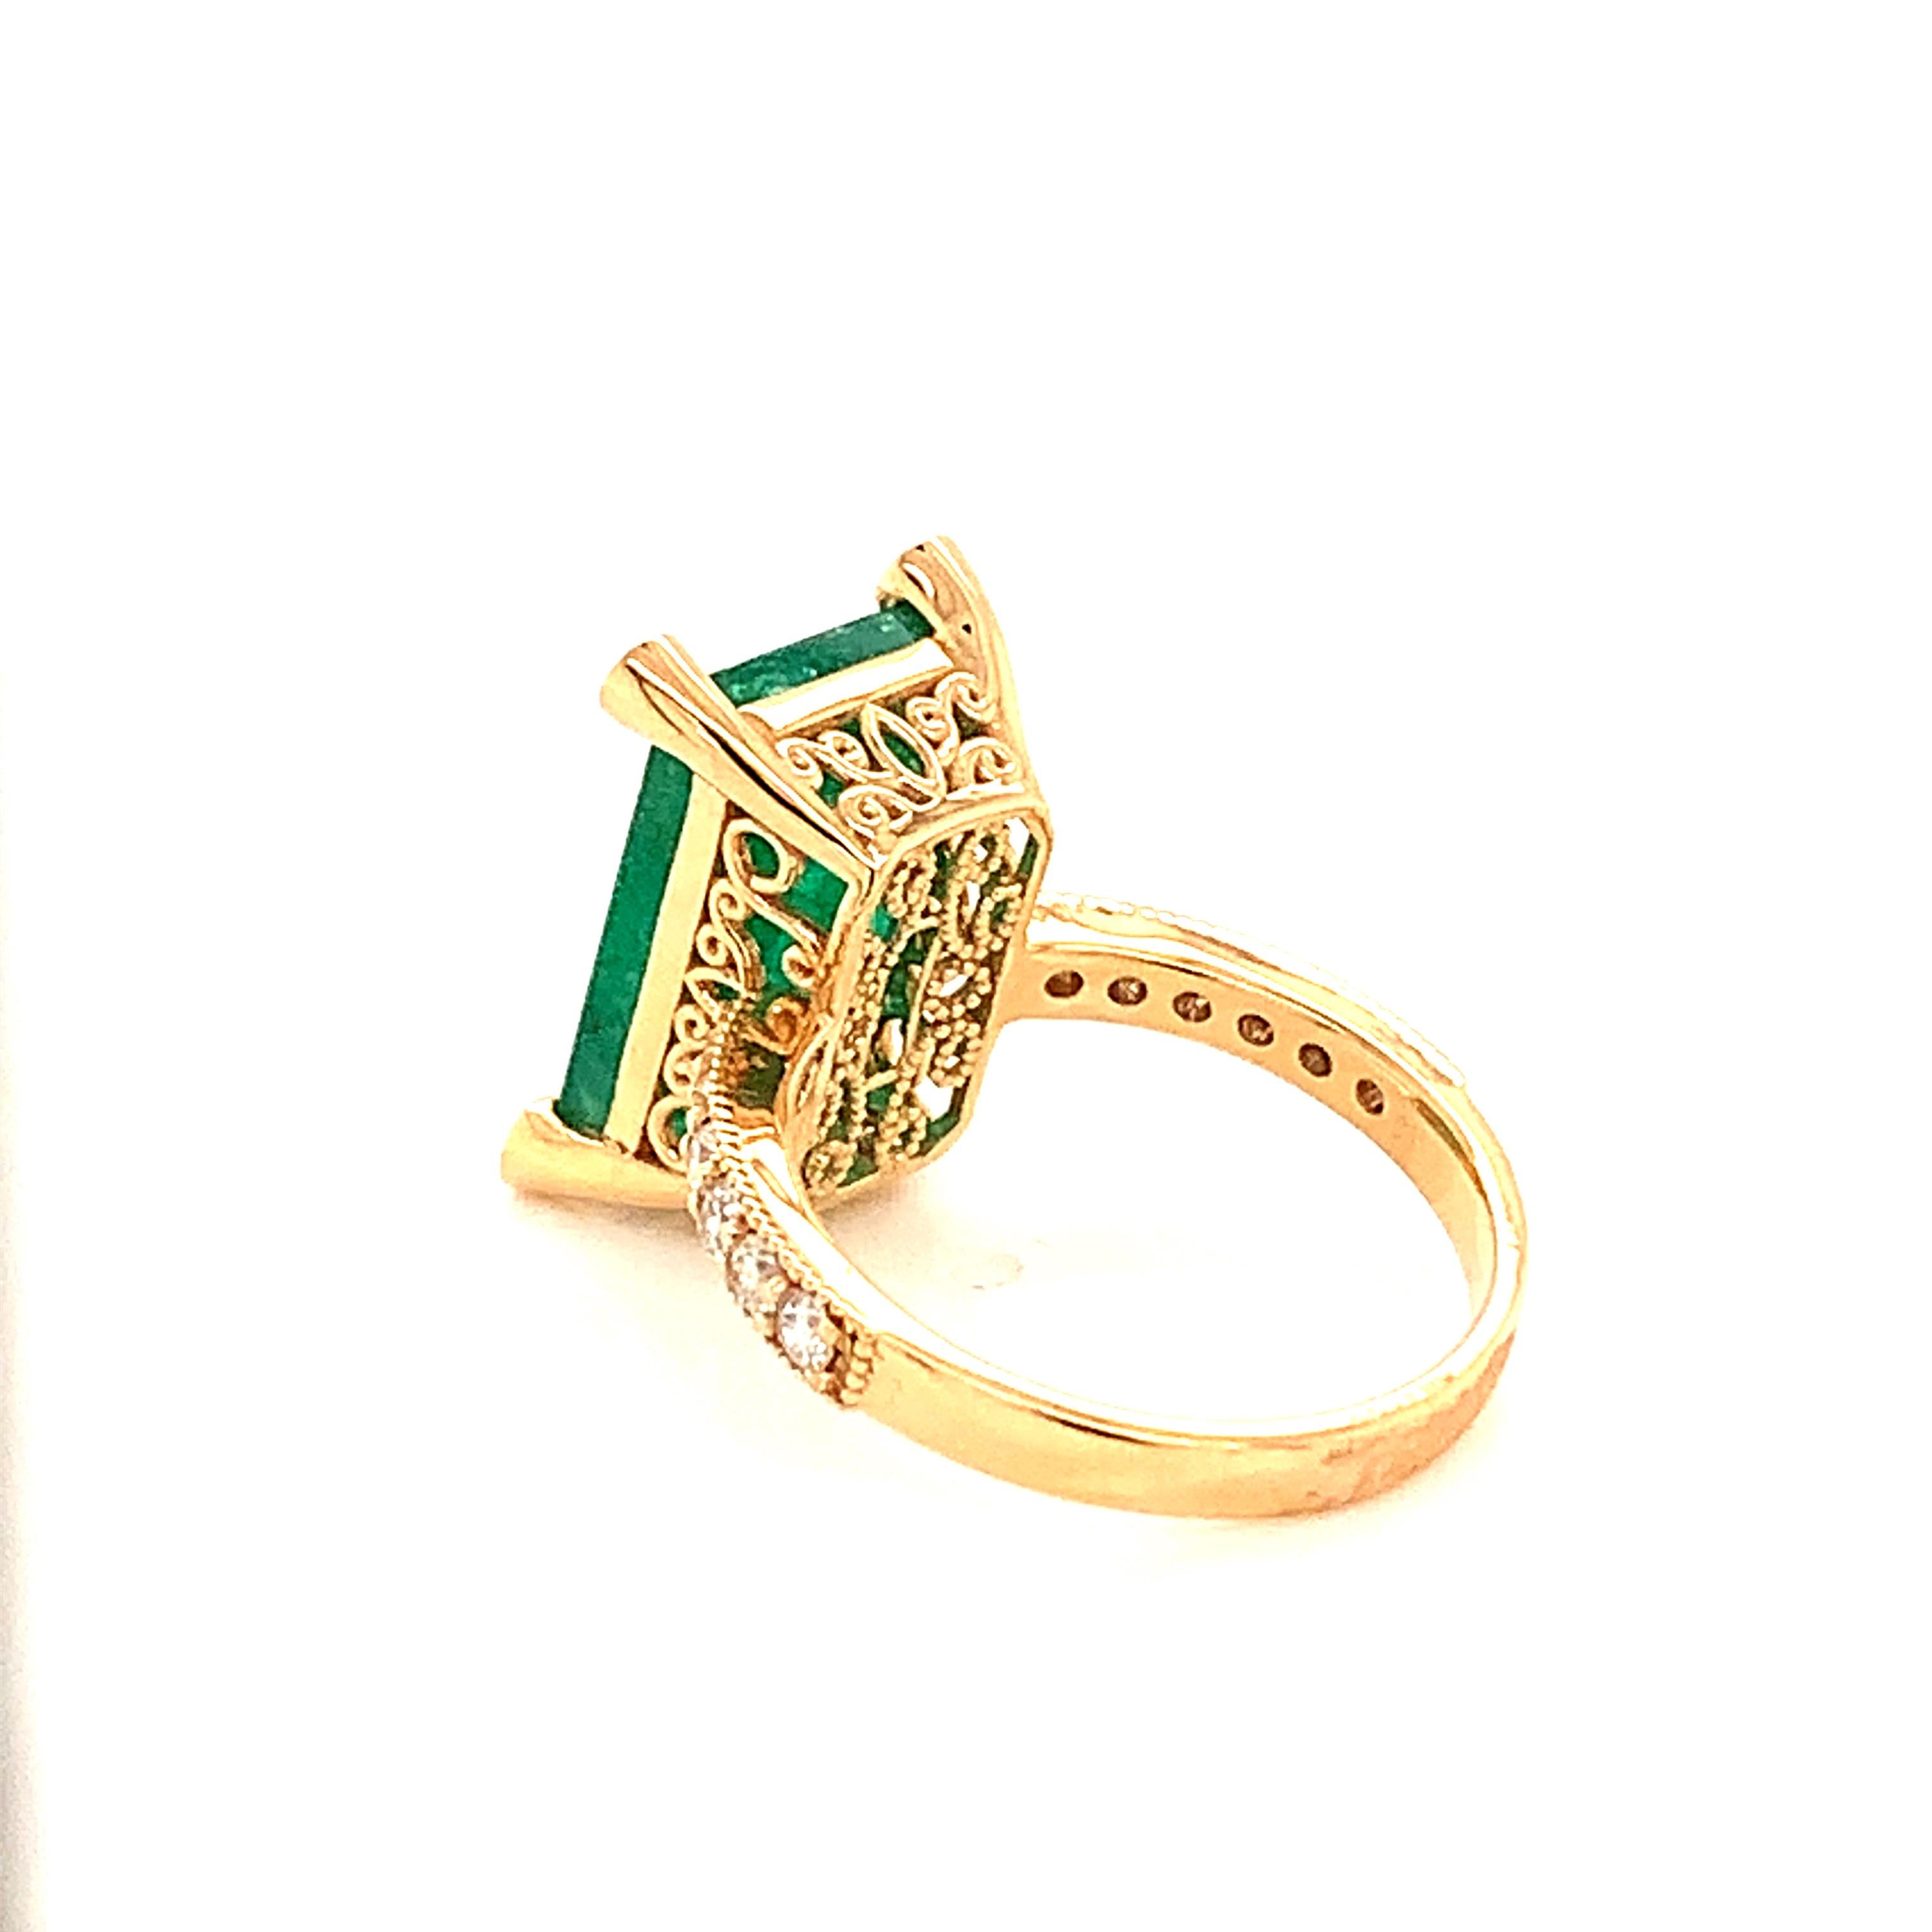 Natural Emerald Diamond Ring 14k Gold 4.37 TCW GIA Certified For Sale 7